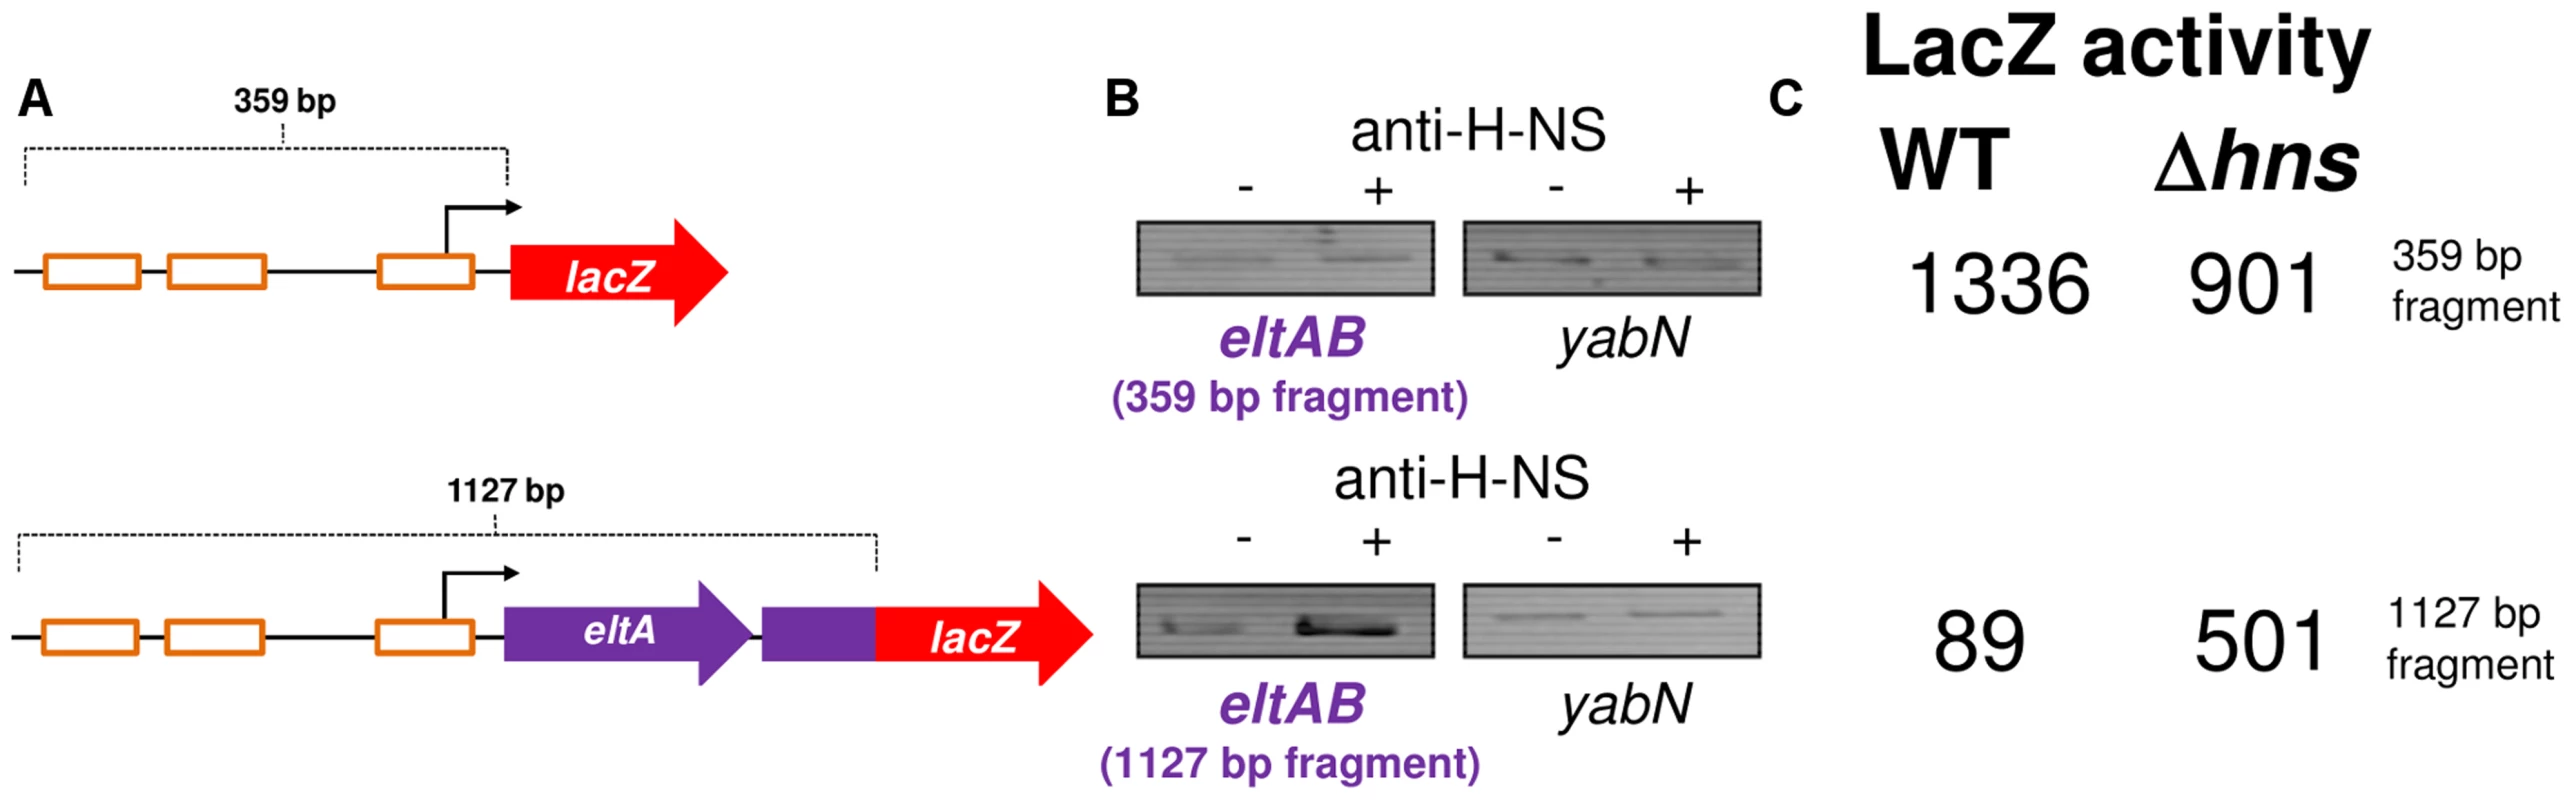 The <i>eltAB</i> promoter is directly repressed by H-NS.